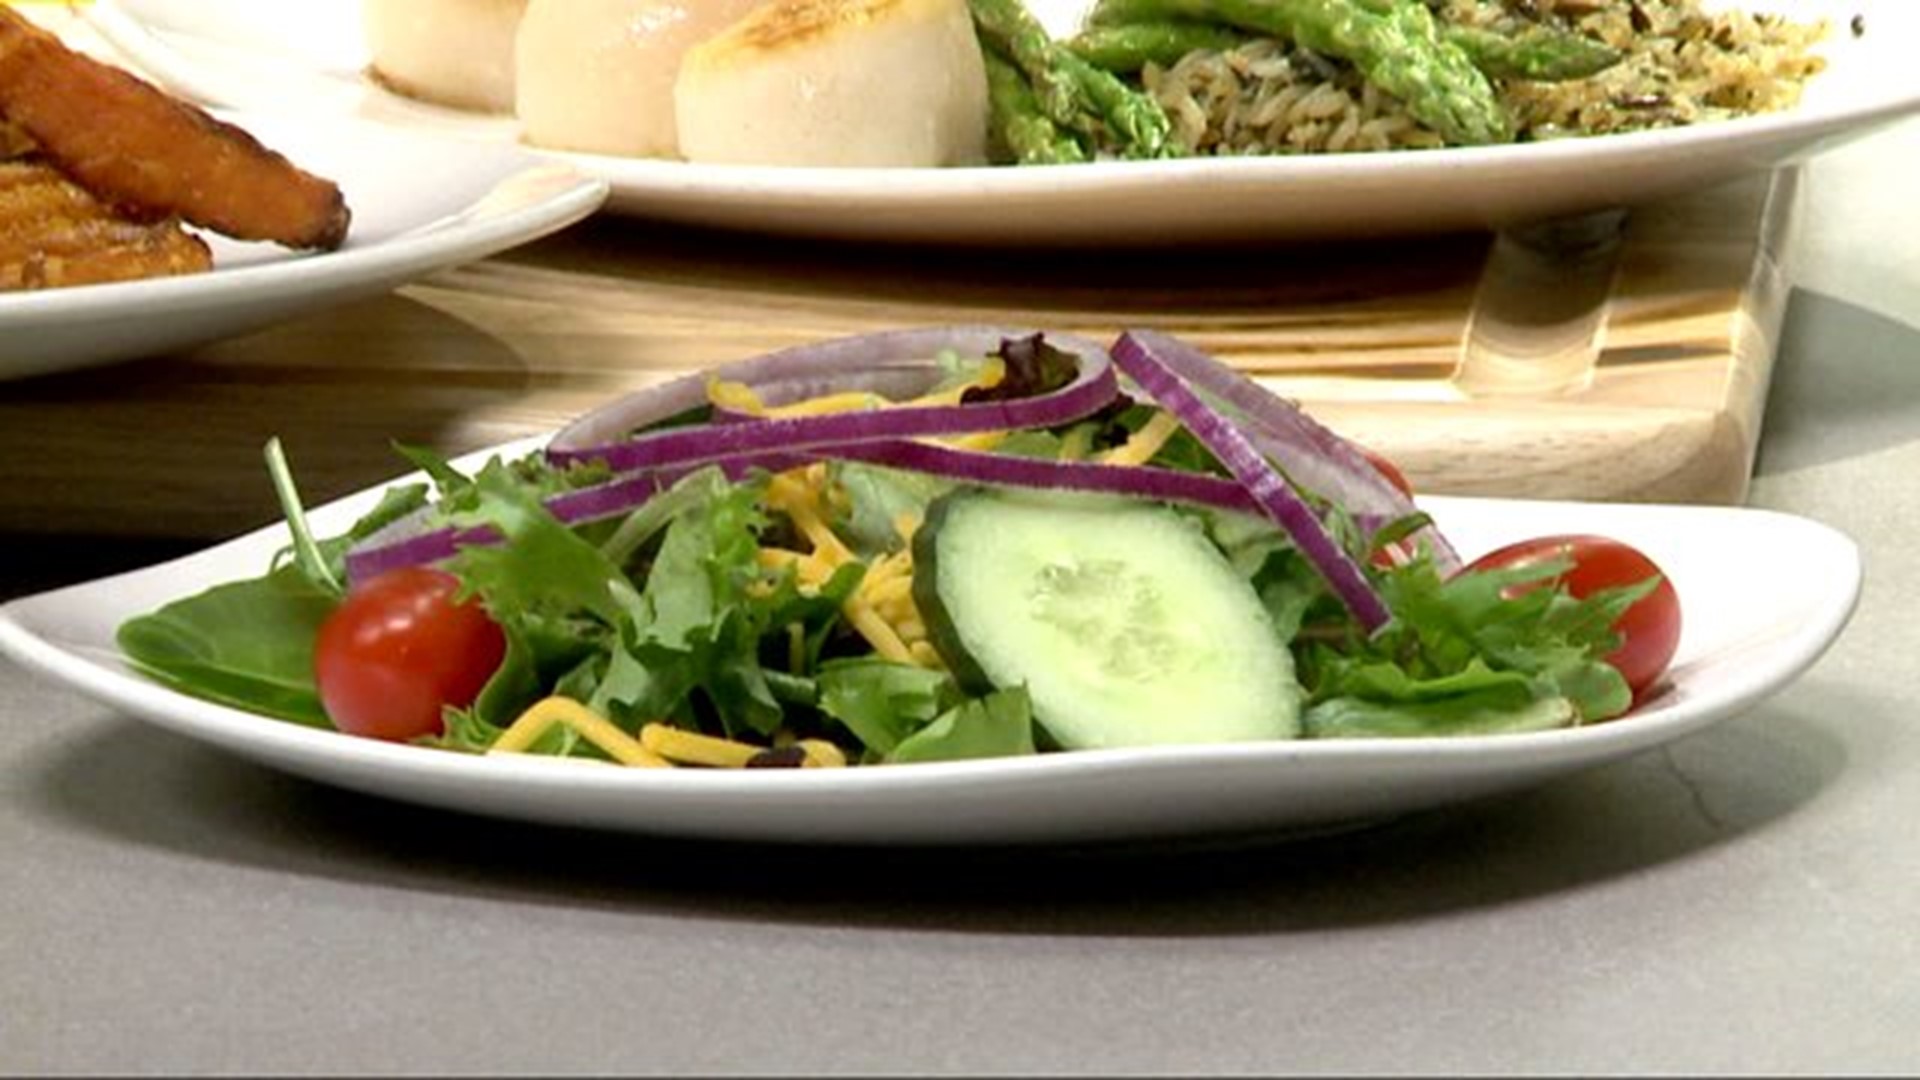 FOX43 Kitchen: White Rose Bar and Grill